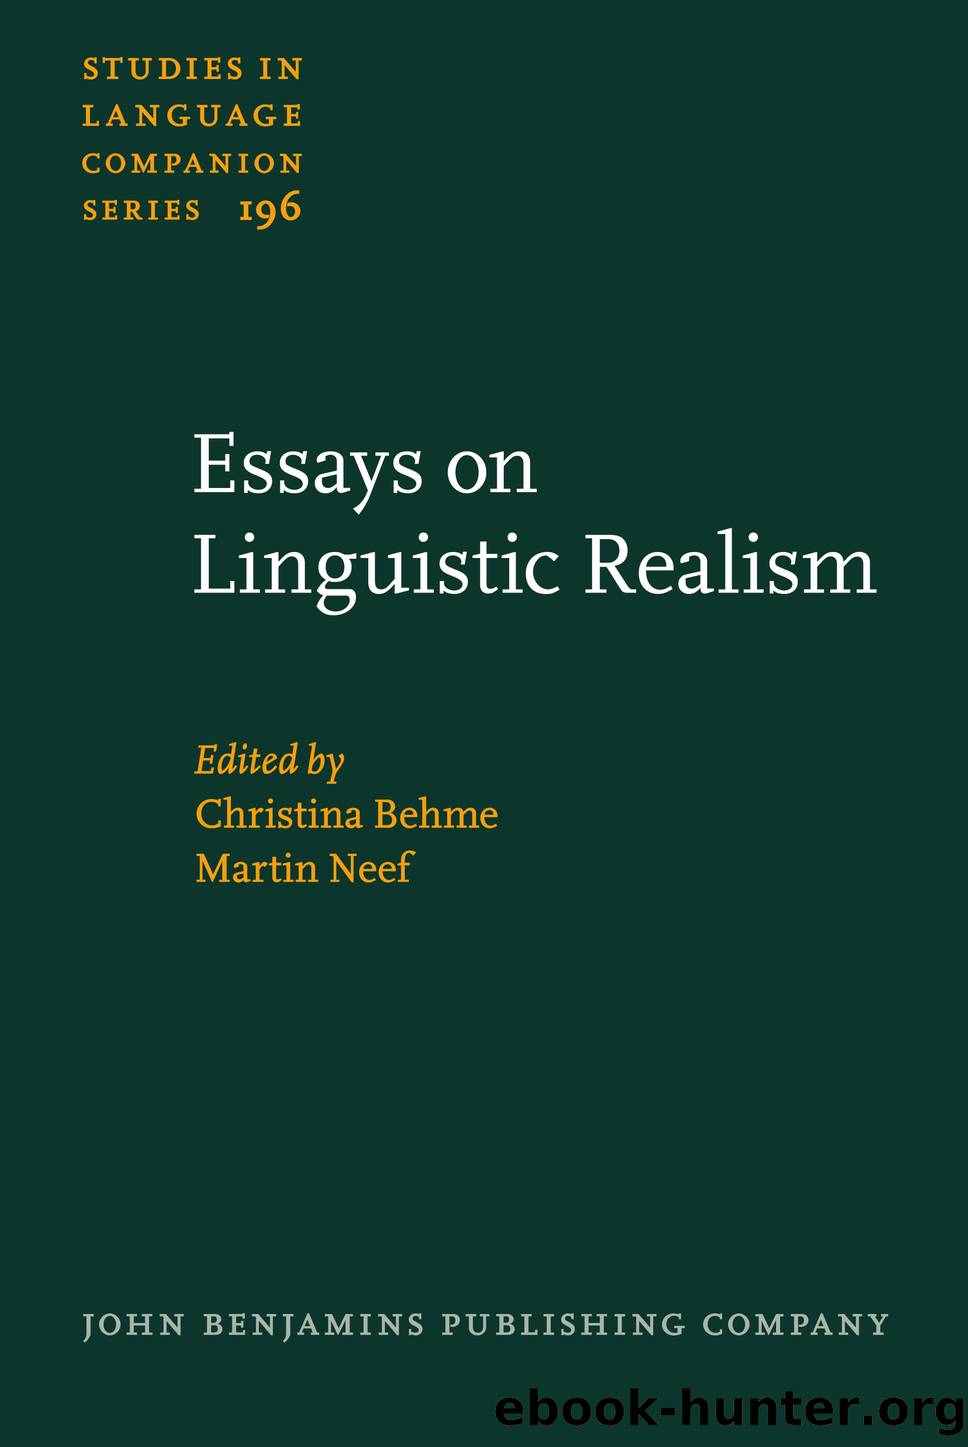 Essays on Linguistic Realism by Behme Christina;Neef Martin; & Martin Neef